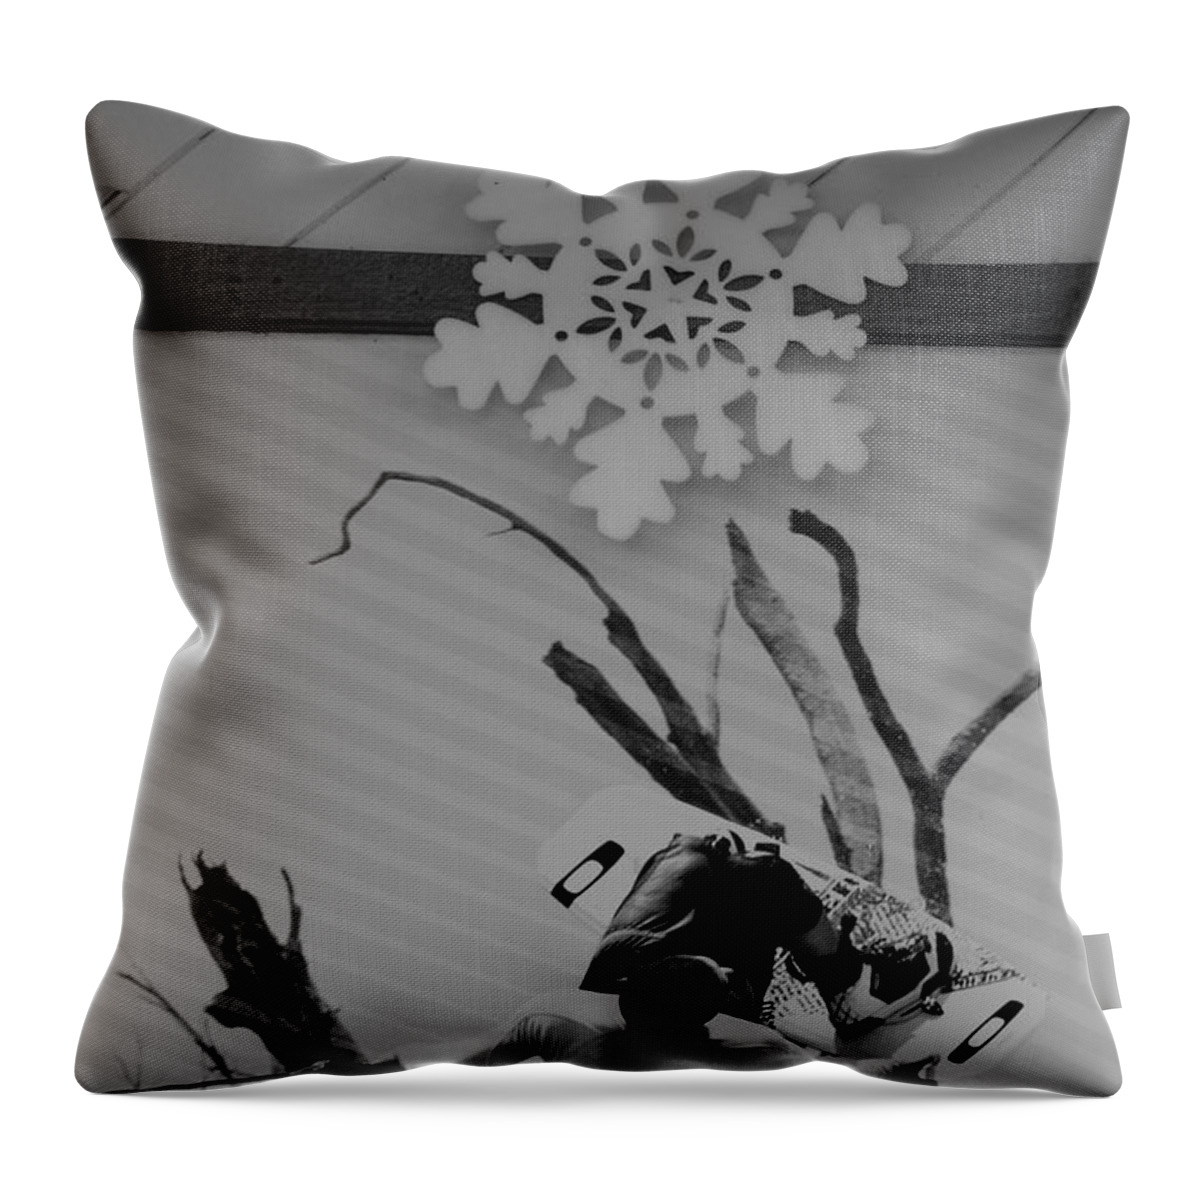 Snow Flake Throw Pillow featuring the photograph Wall Surfing With A Snow Flake by Rob Hans